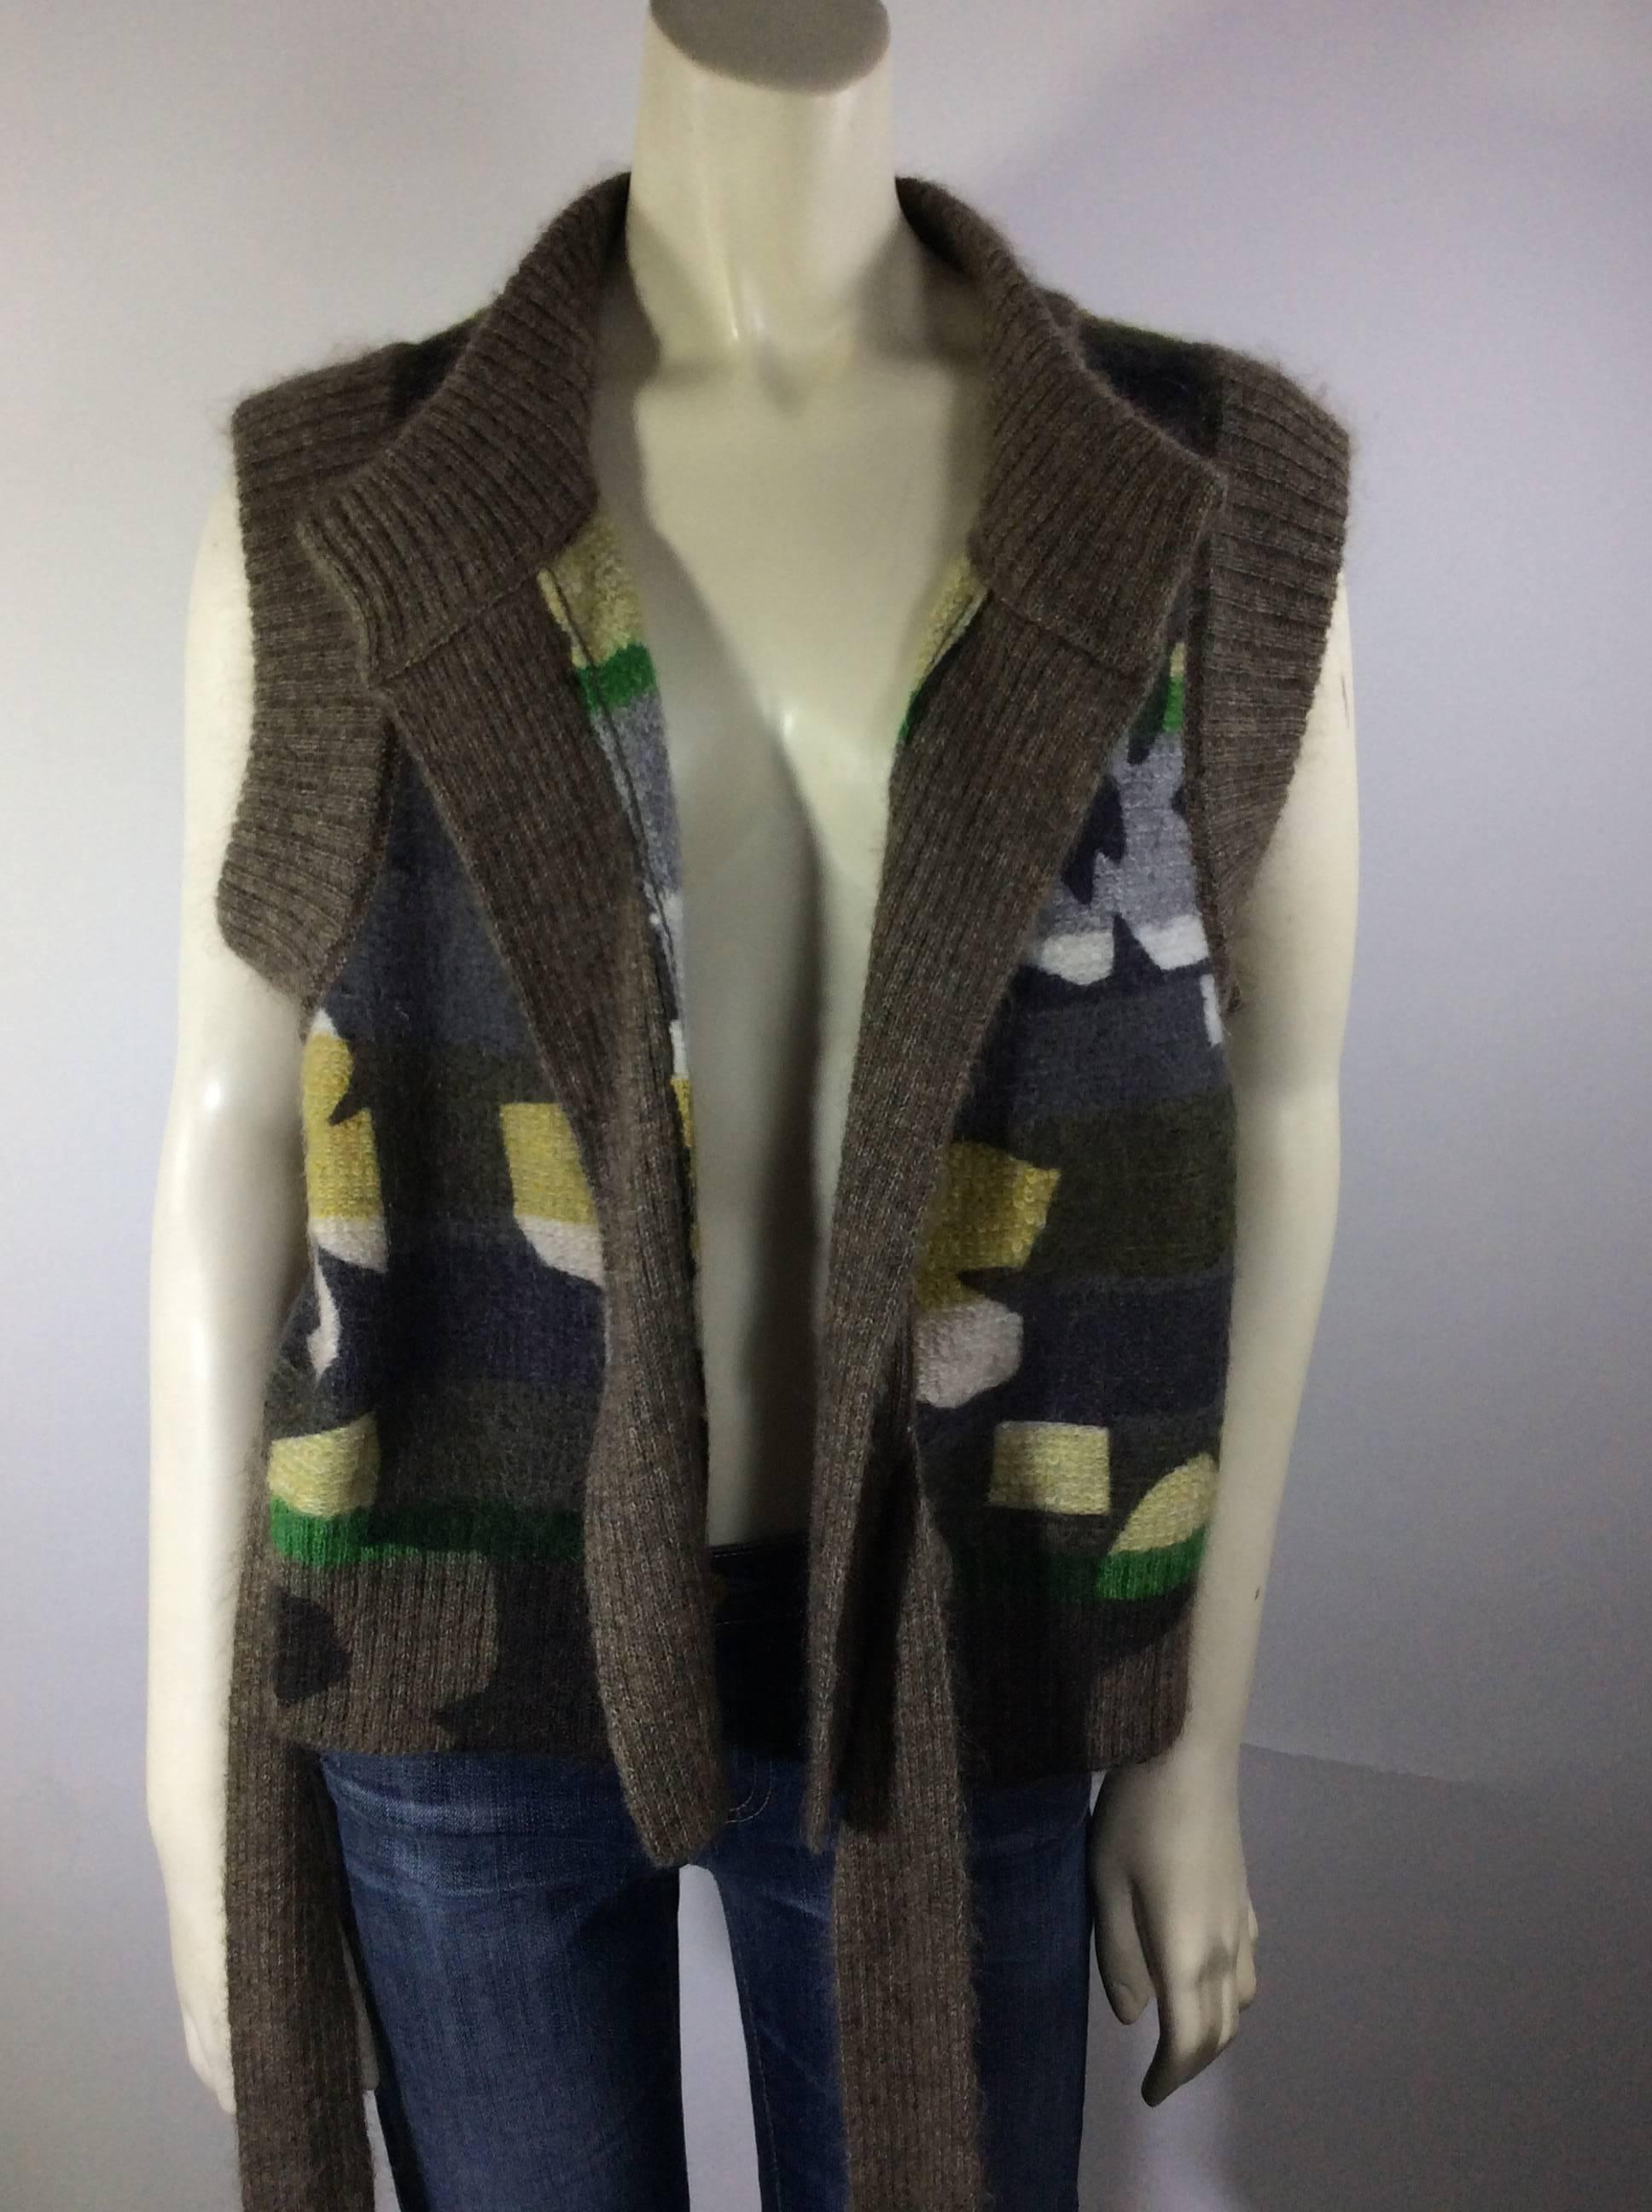 Chloe Sleeveless Wrap around Cardigan
Adjustable Tie in Front
Floral Graphic Design In Yellow/Green
Brown Lining with Grey Backing
Slight Pulls on back Shown in Picture 6